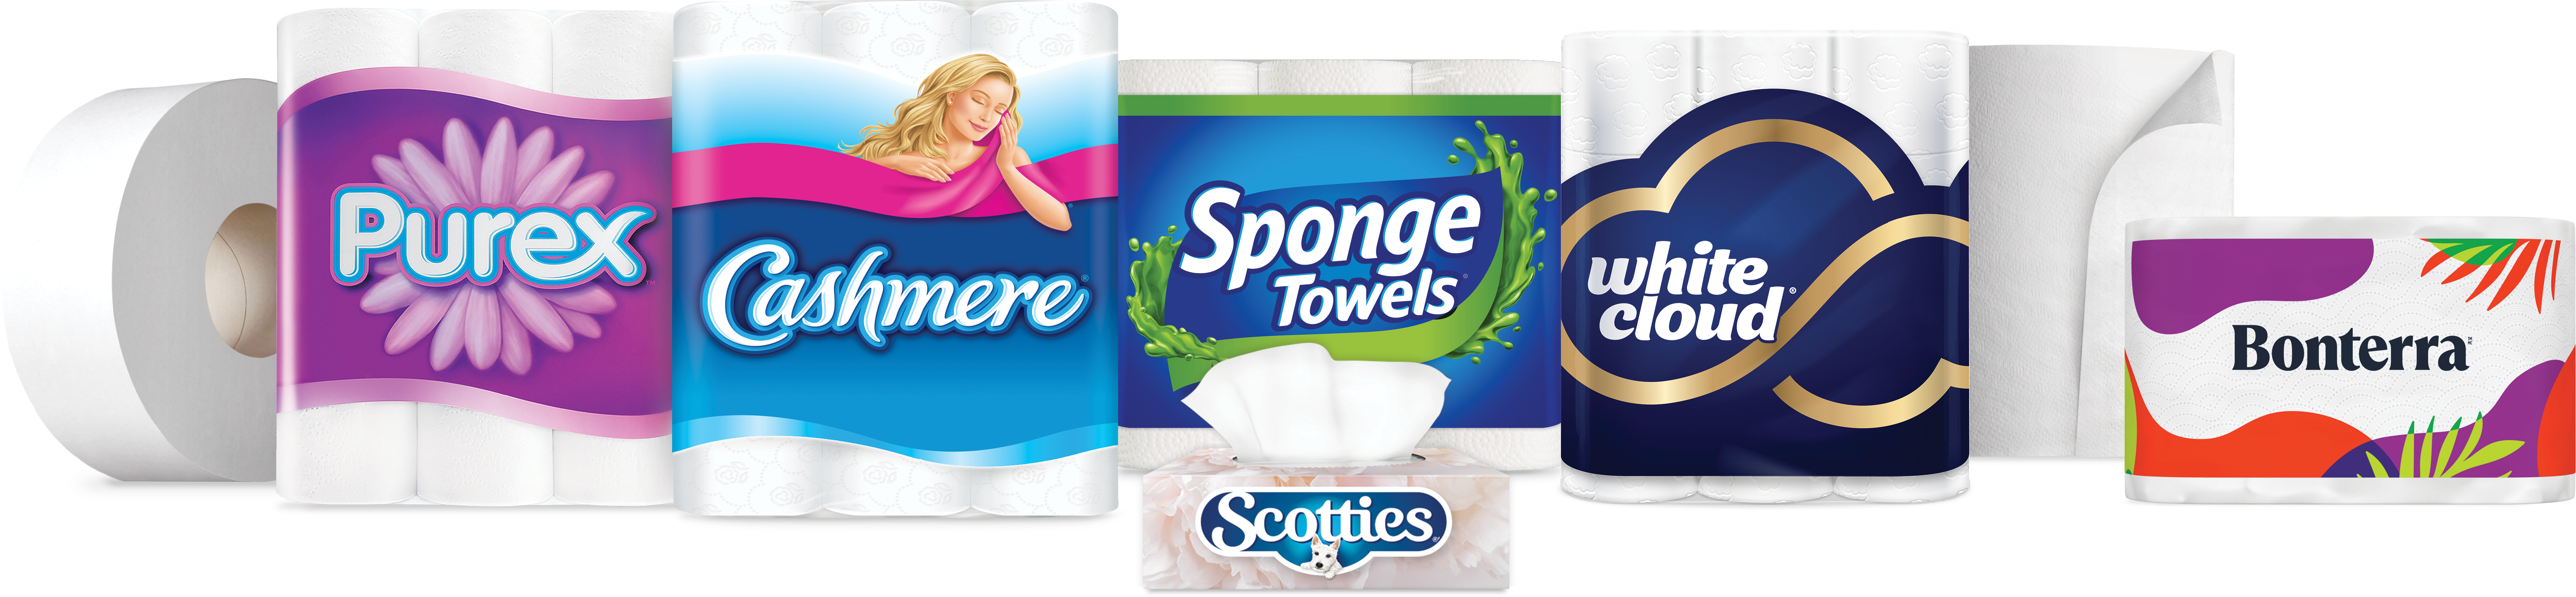 Tissue Kruger - products